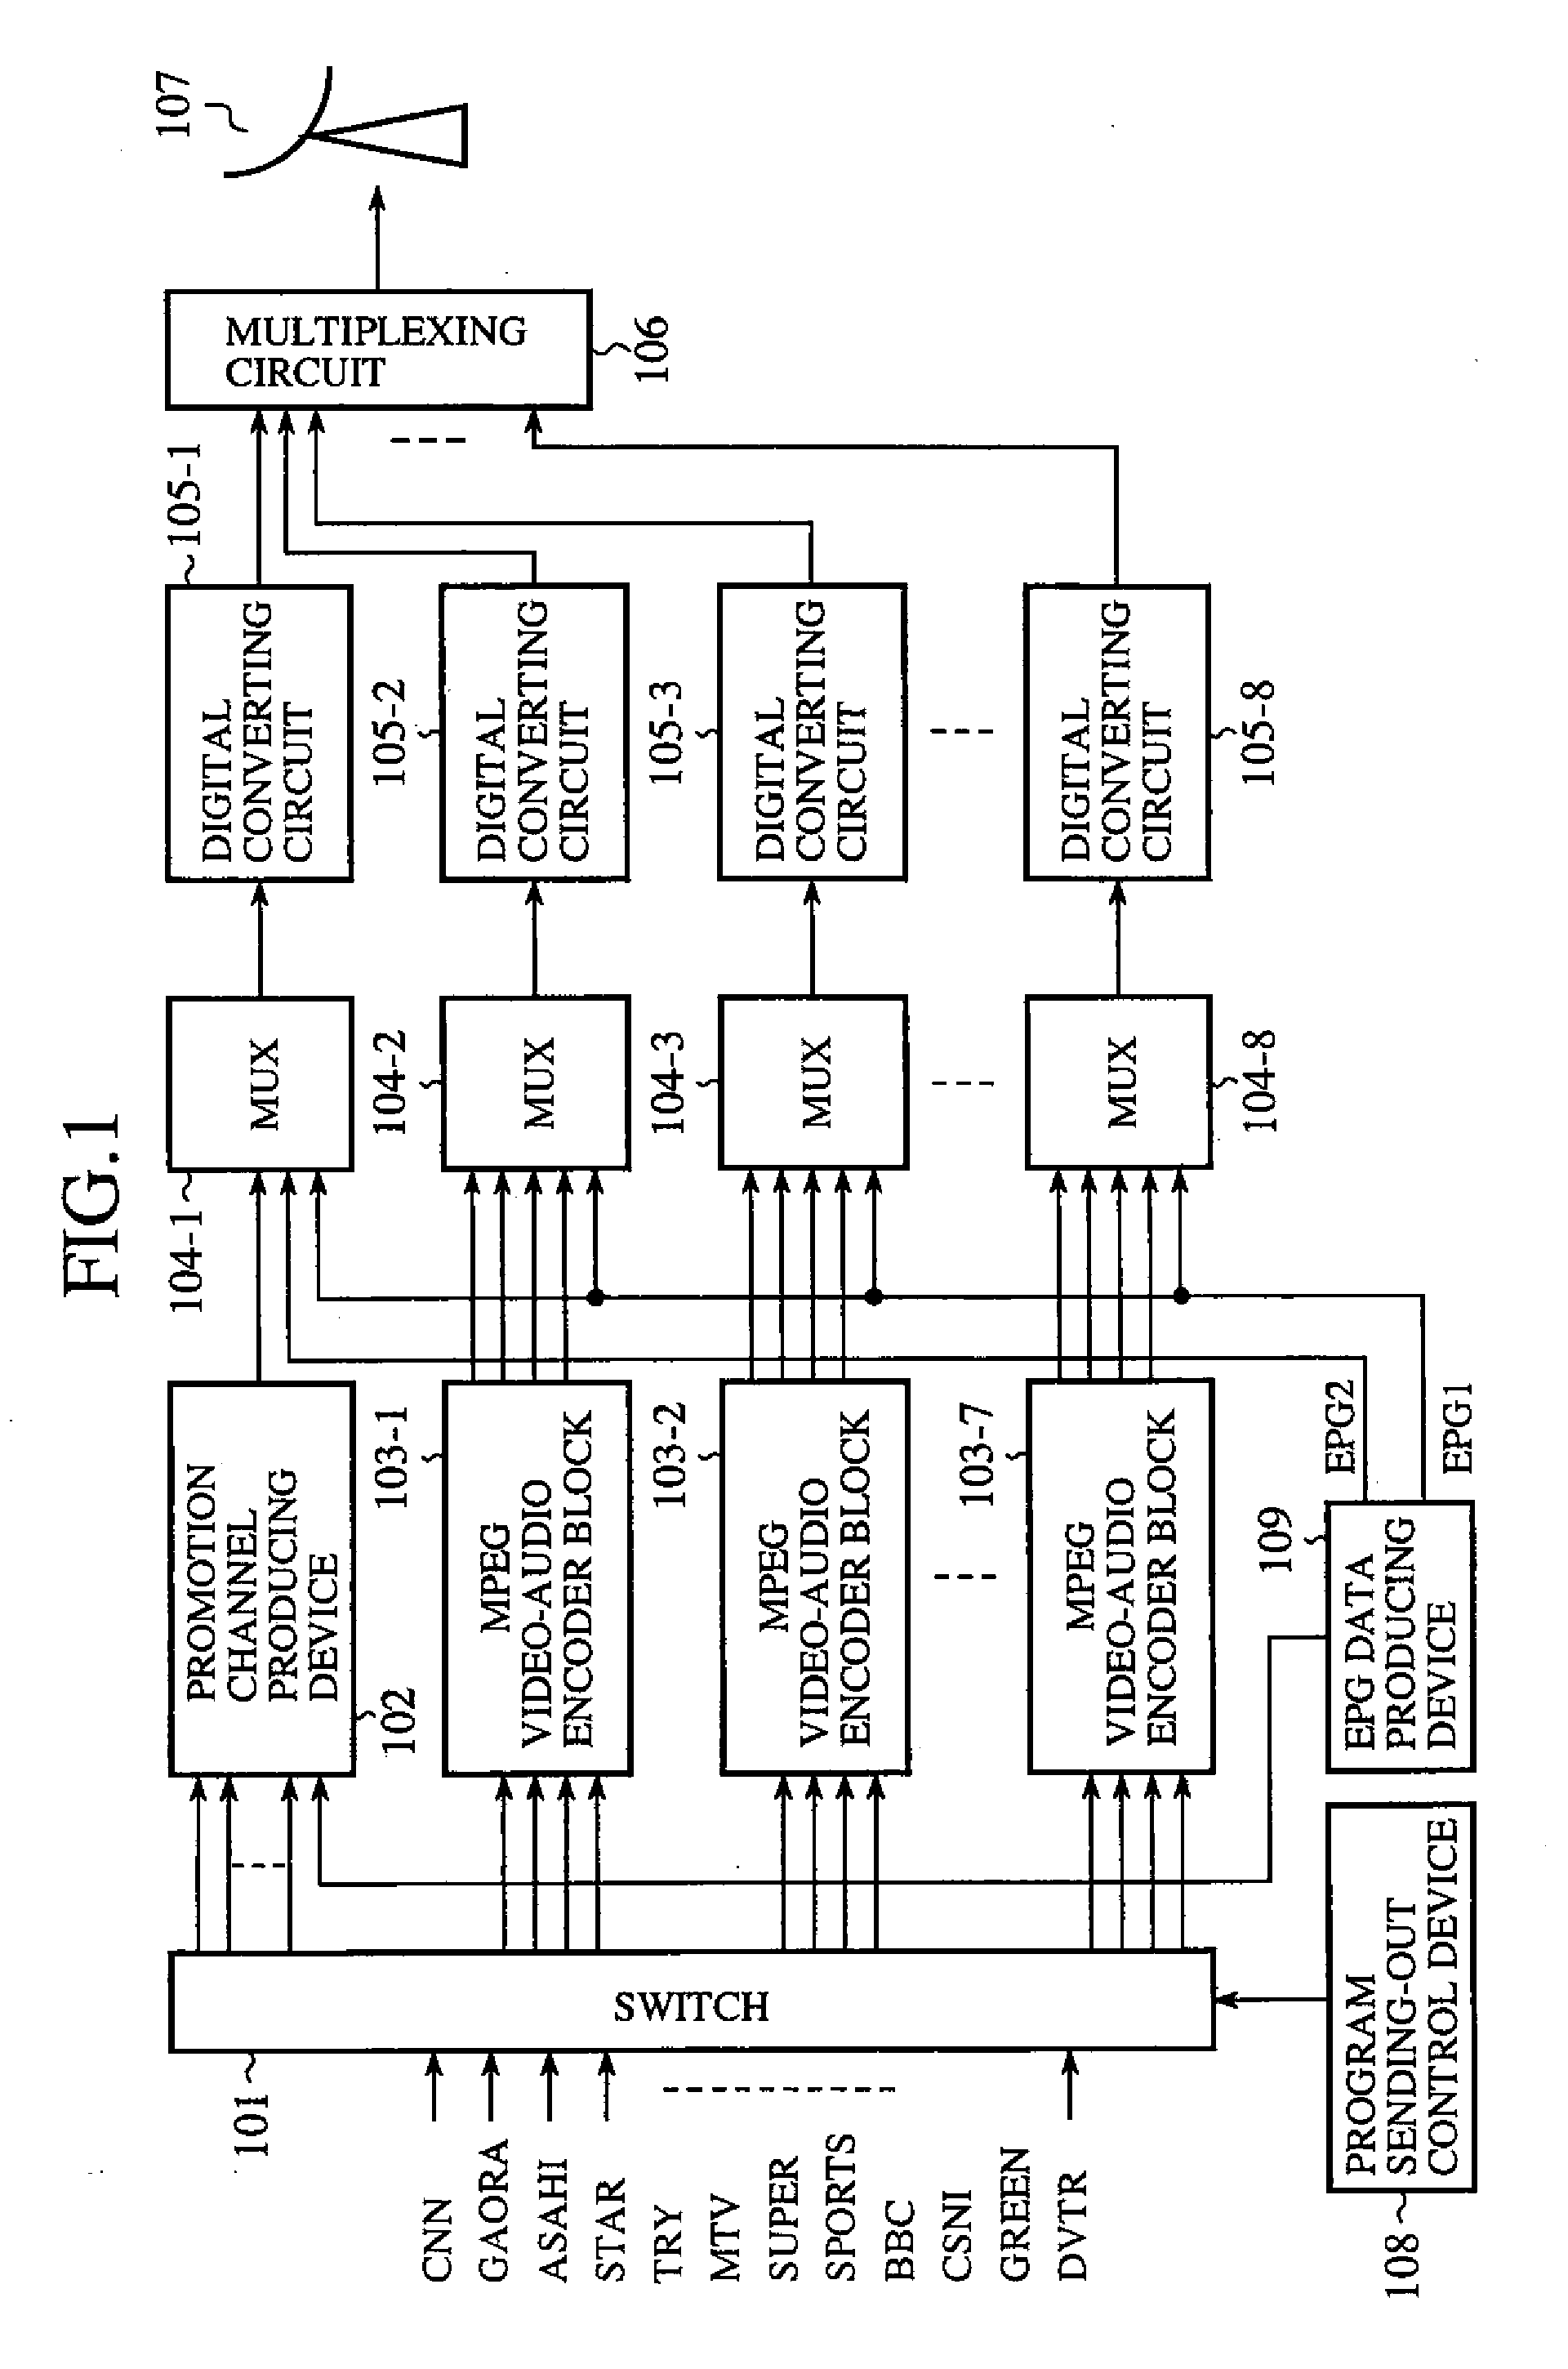 Device for sending-out data in which associated data is multiplexed with main data